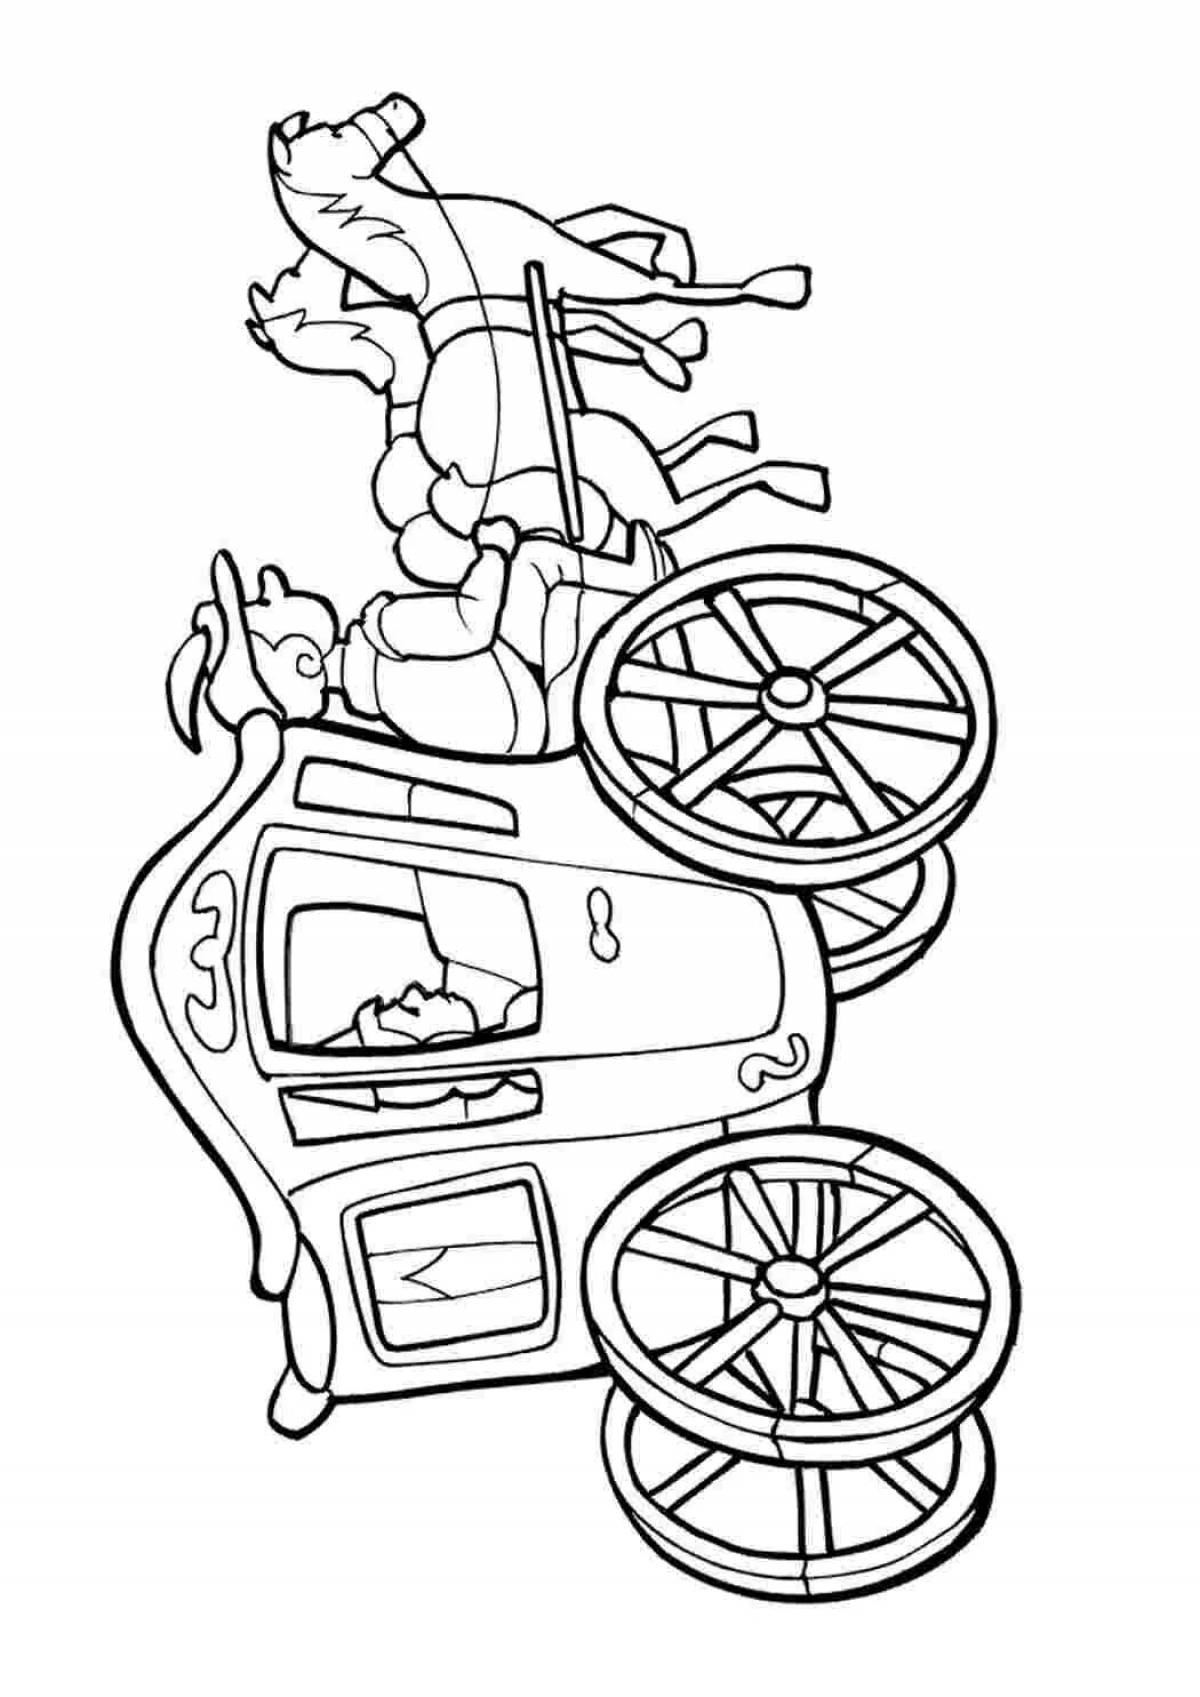 Shiny carriage coloring book for kids